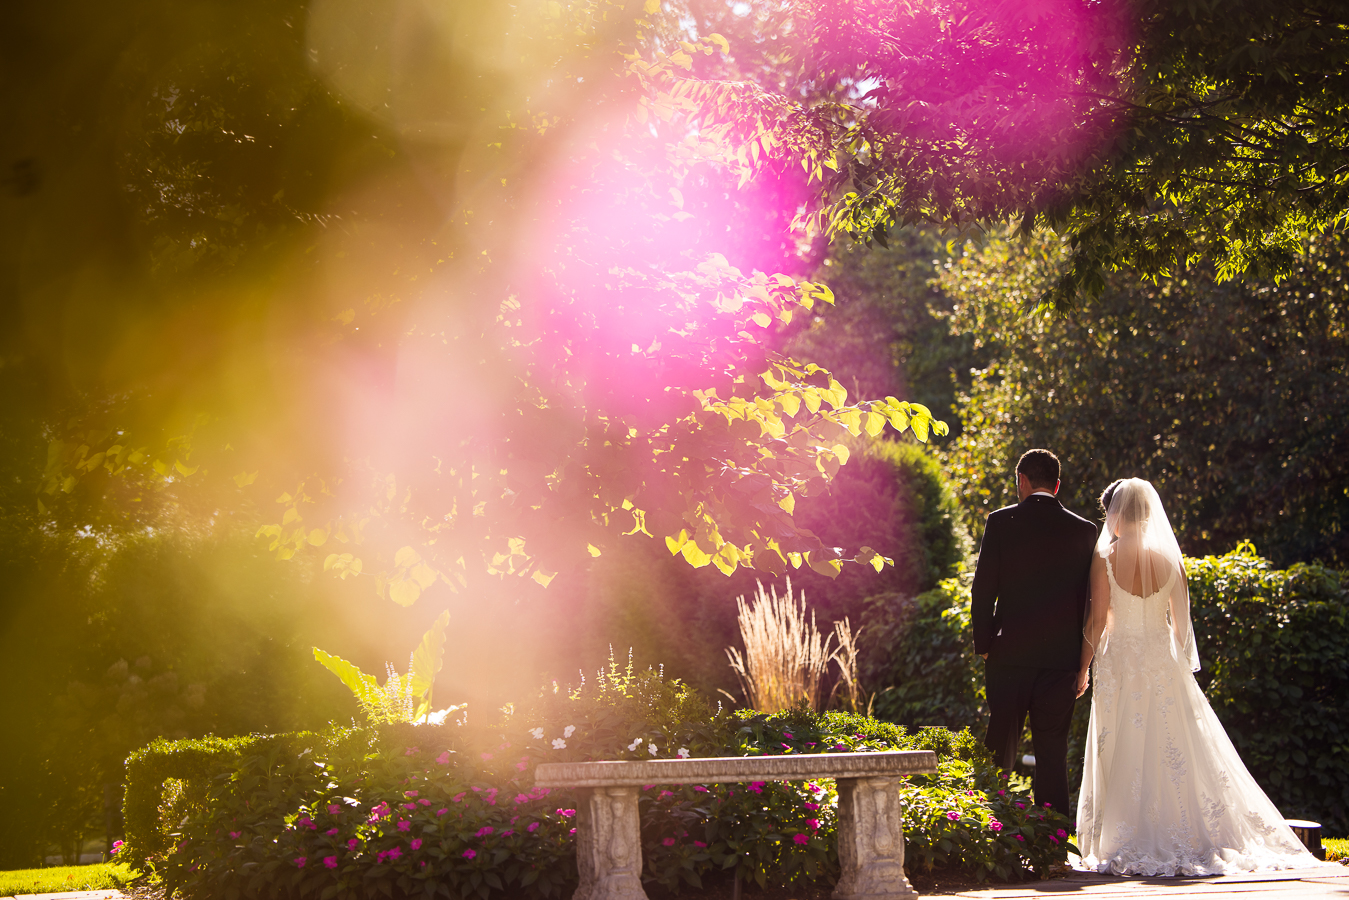 creative wedding photographer, lisa rhinehart, captures this fun, creative colorful image of the bride and groom as they hold hands and walk through the outdoor gardens at the palace at somerset park in new jersey before their black and gold wedding ceremony 